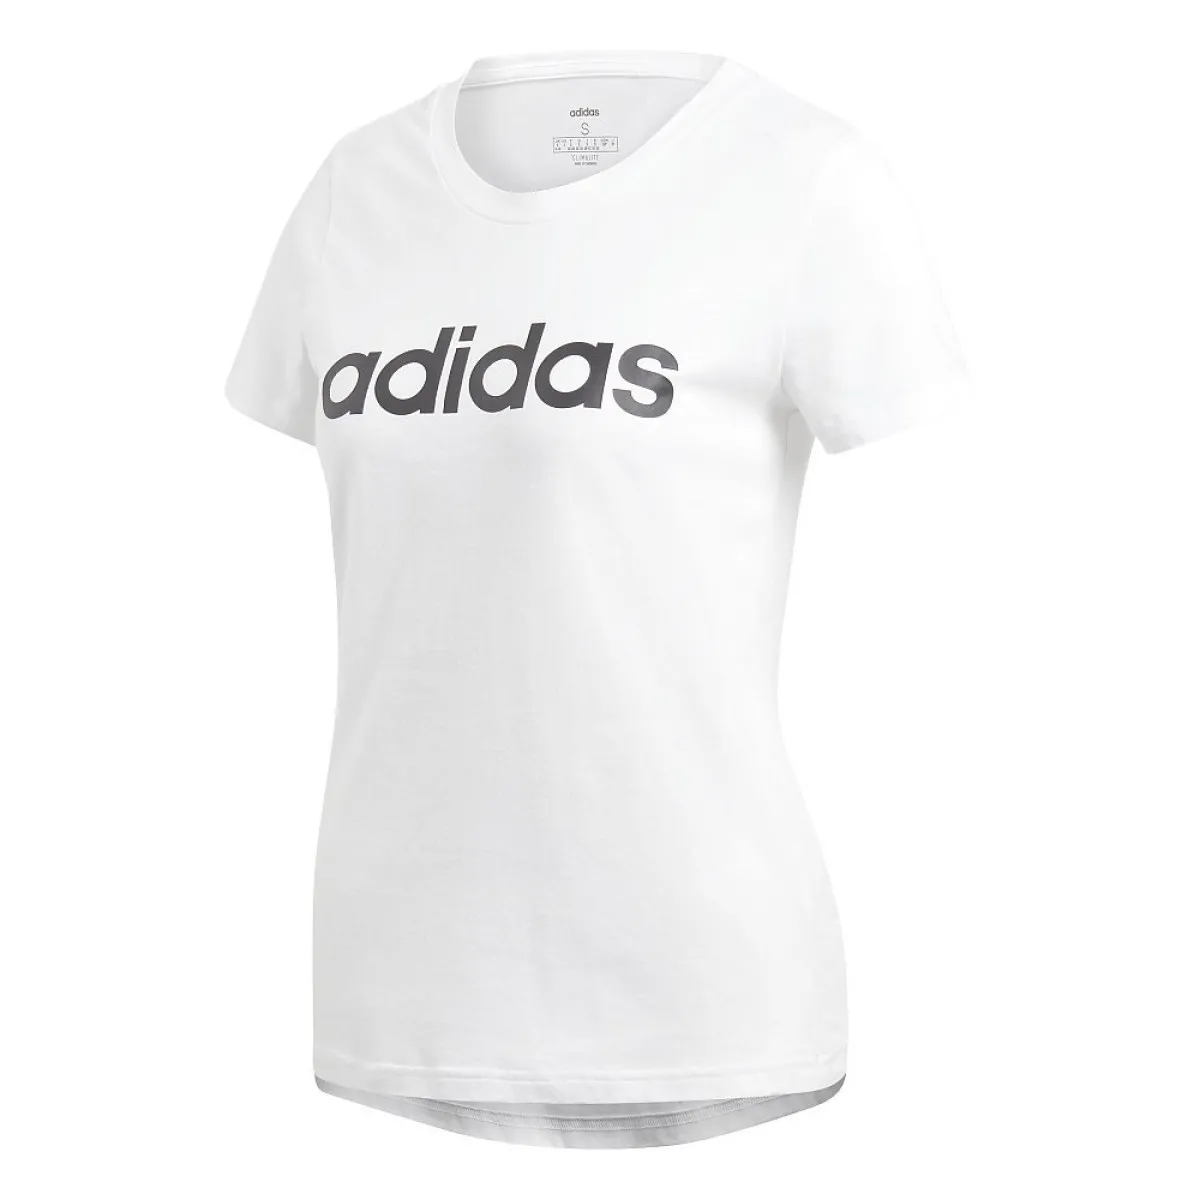 adidas Women s Performance Slim Fit T-Shirt white front